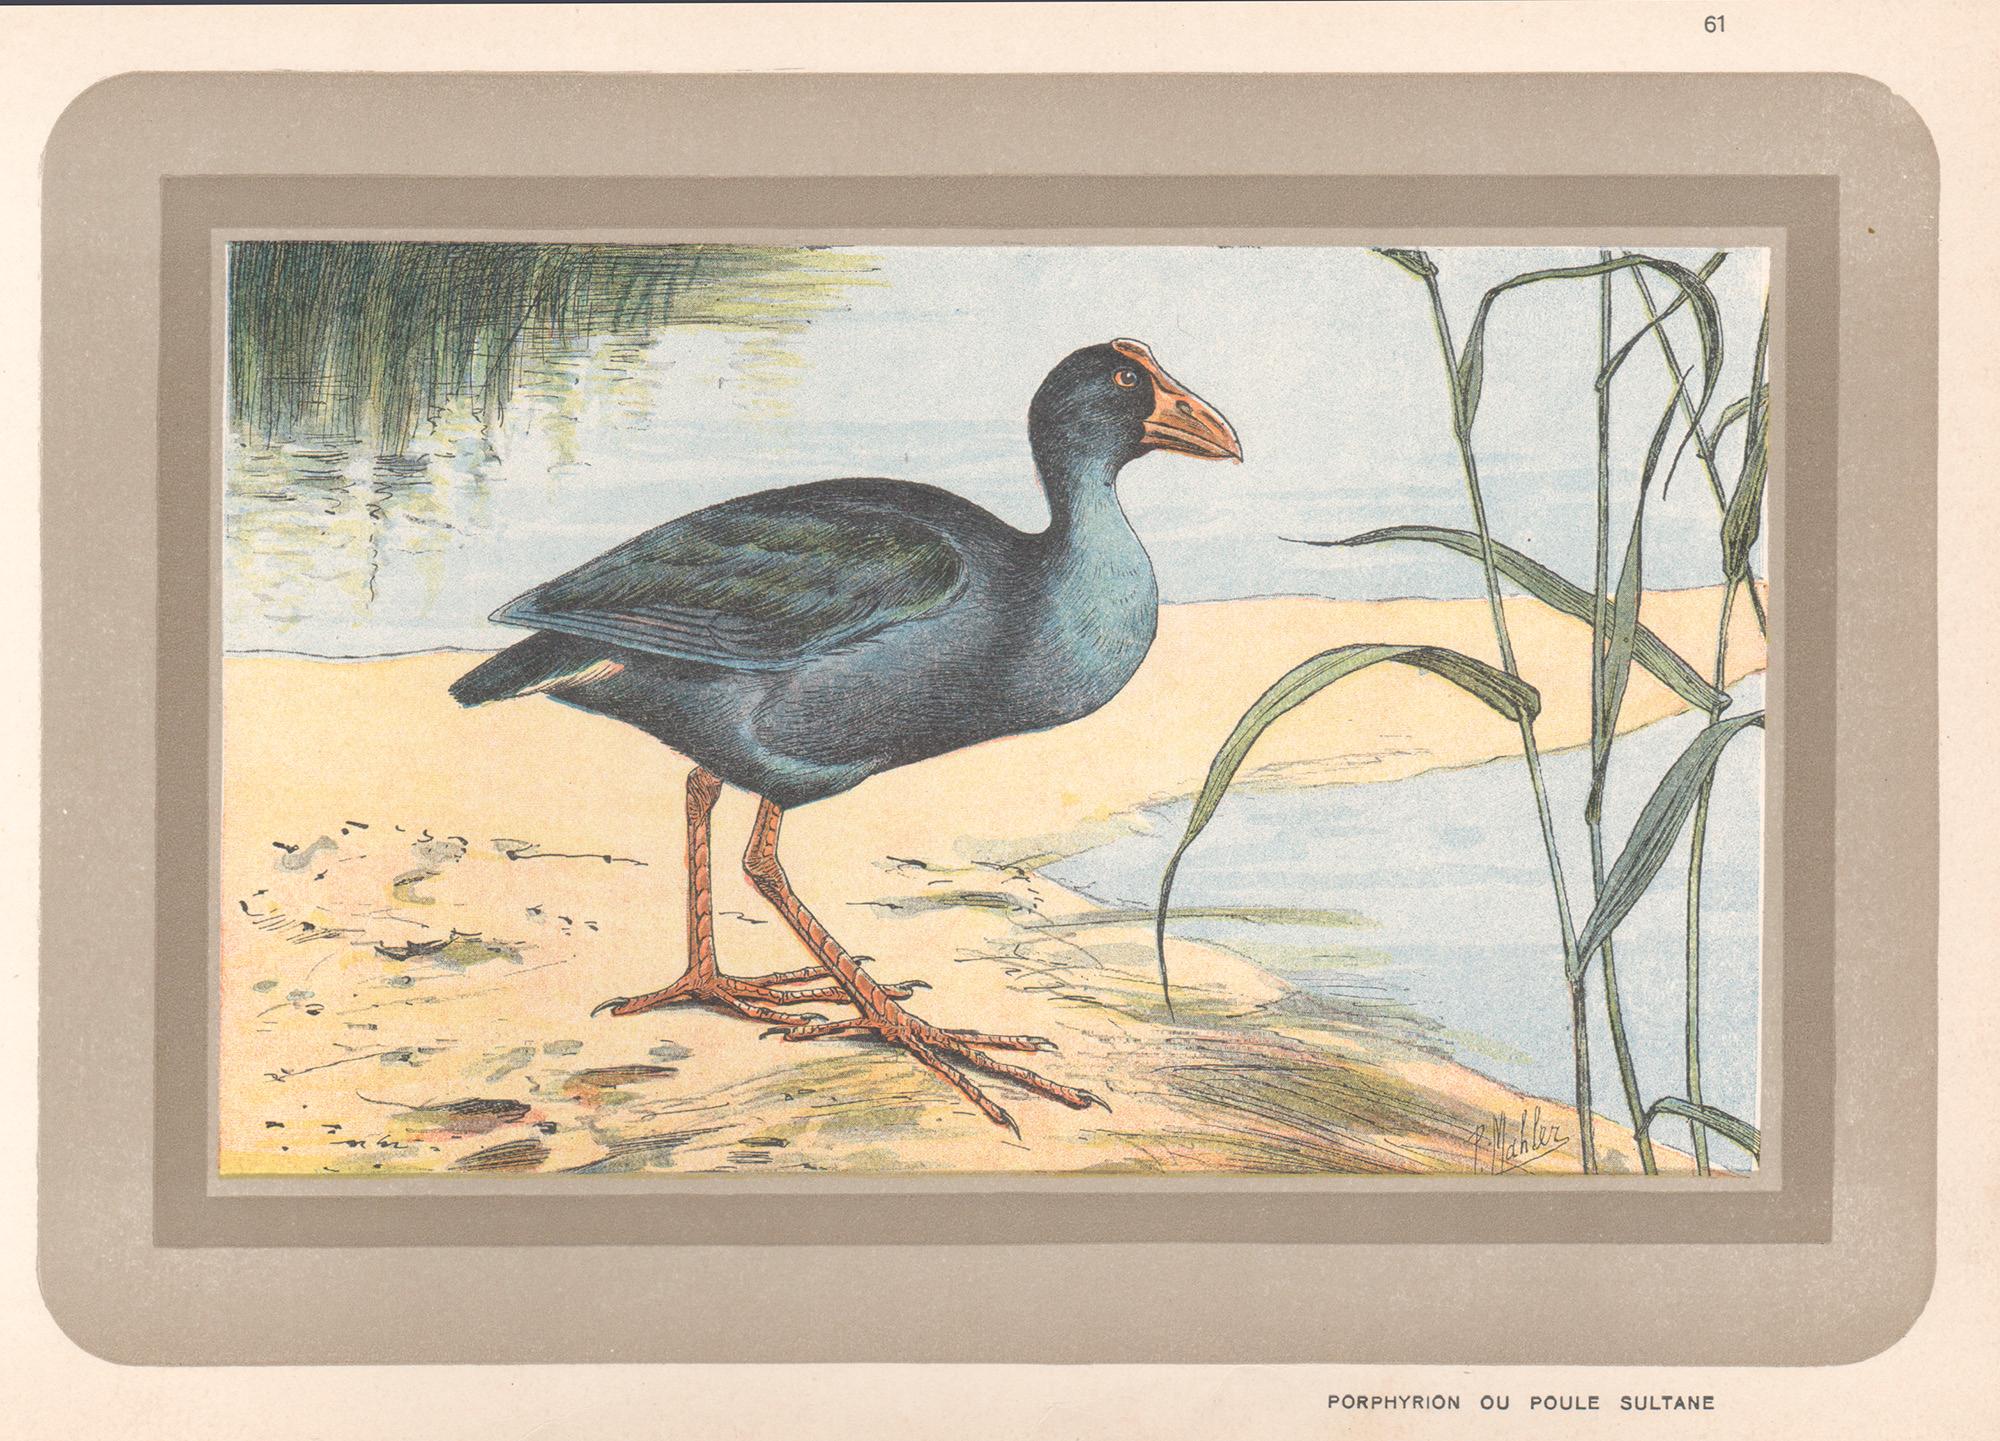 Unknown Animal Print - Western Swamphen, French antique natural history water bird art print